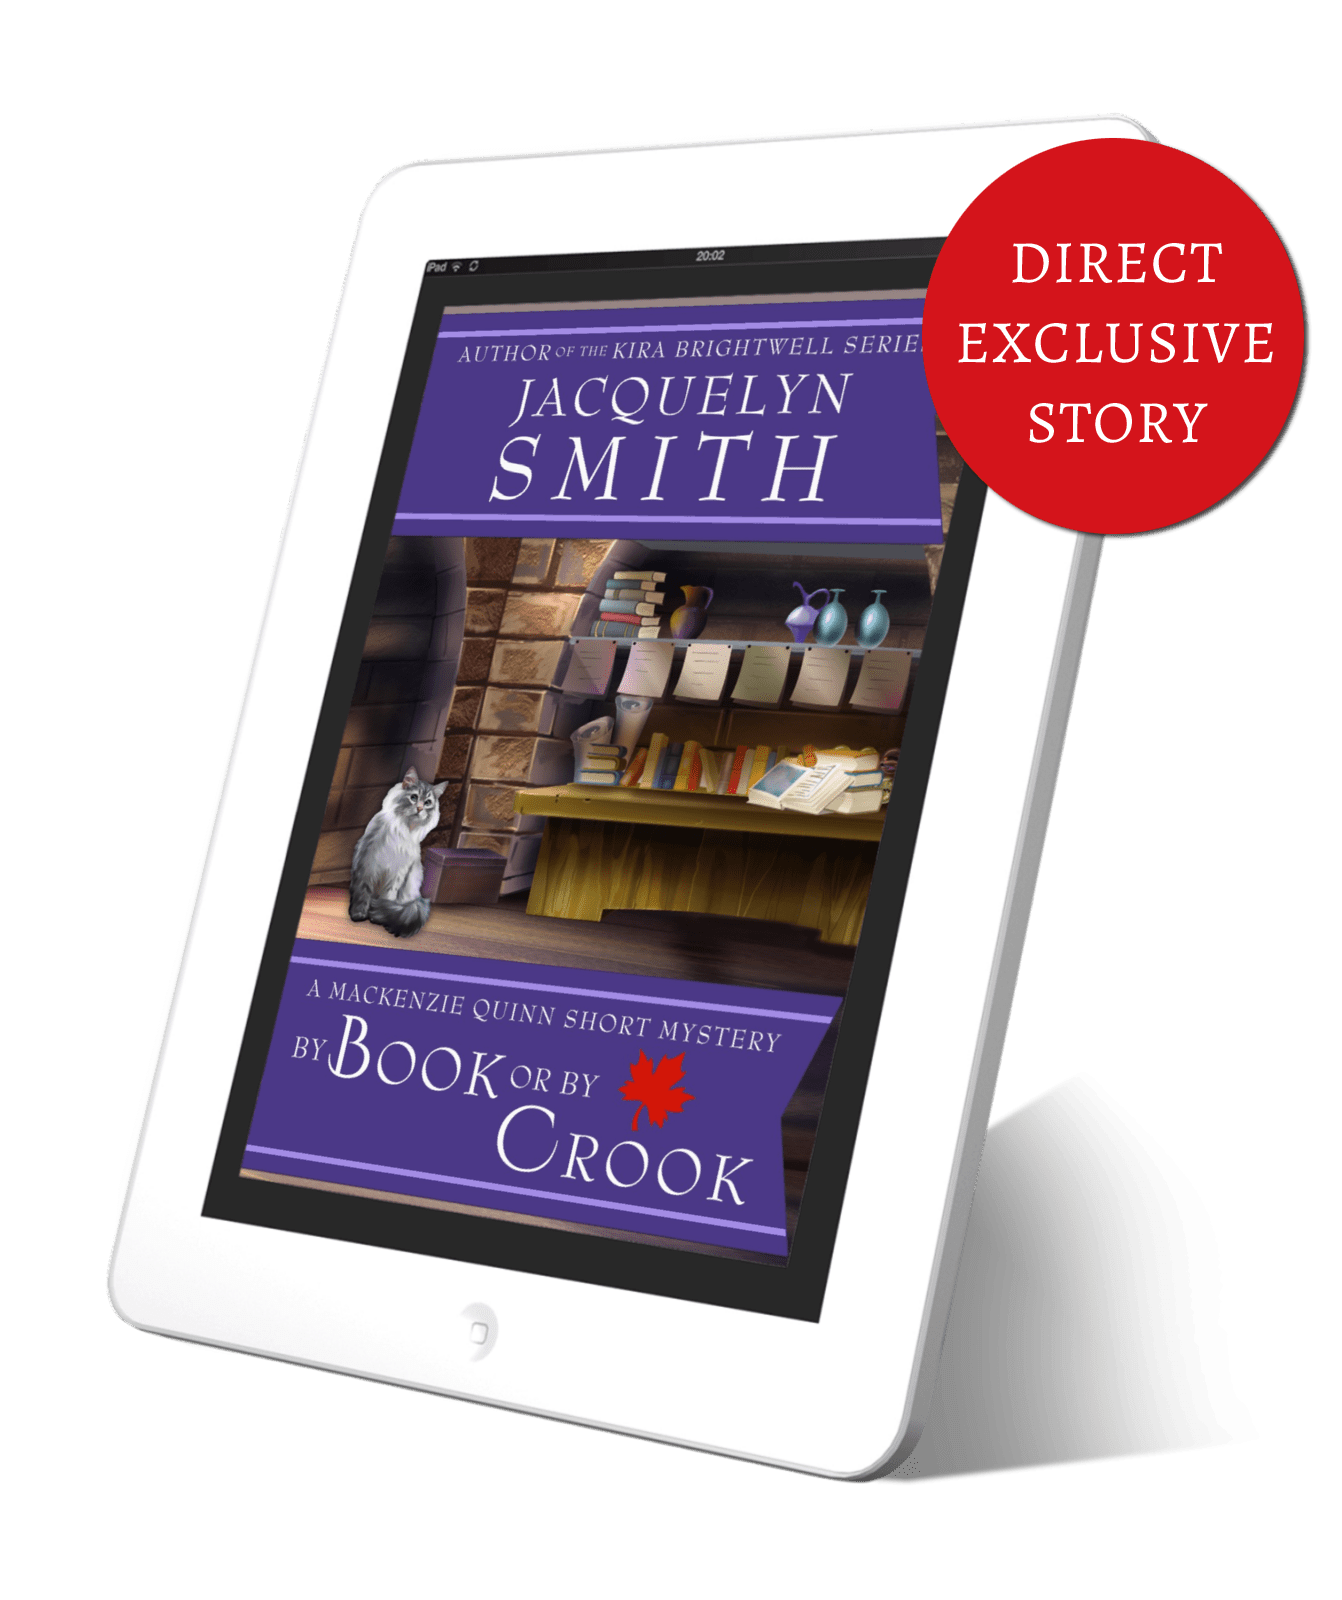 By Book or by Crook: A Mackenzie Quinn Short Mystery (Direct Exclusive) - Jacquelyn Smith Books